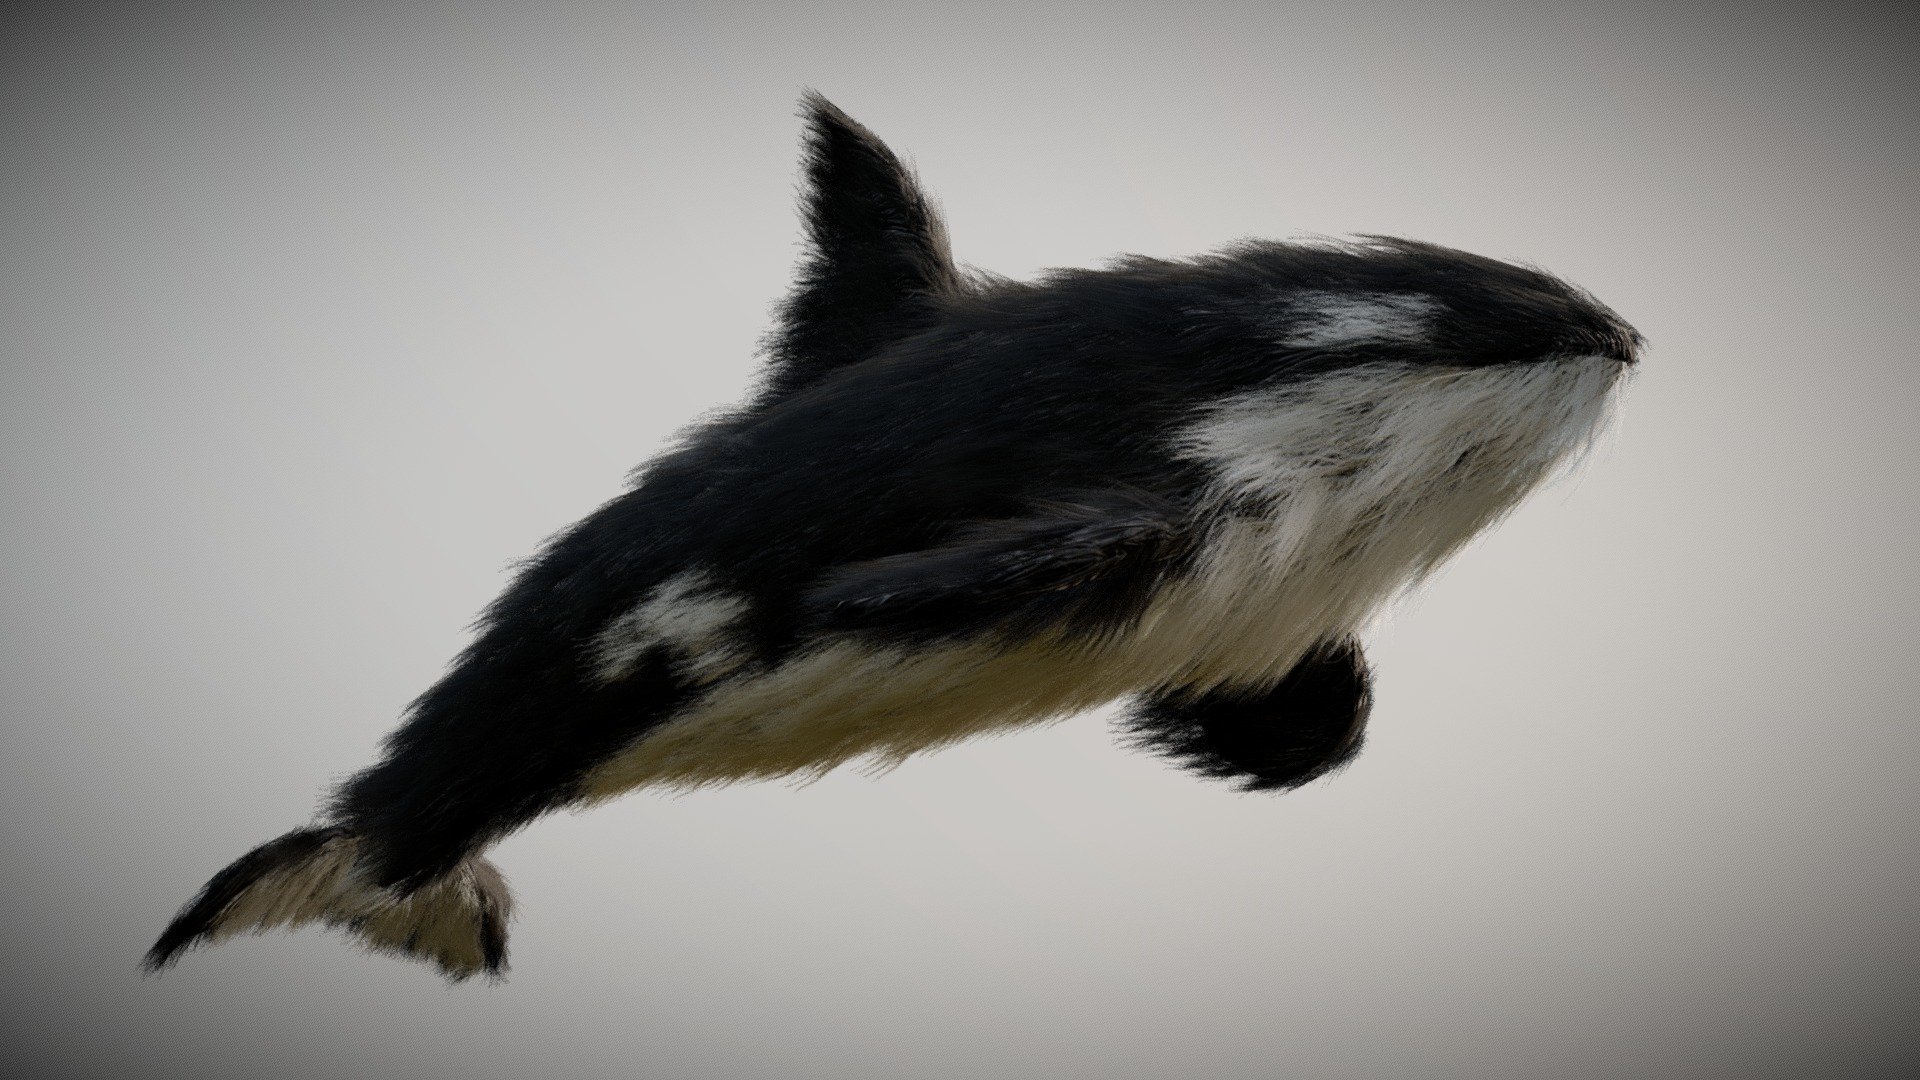 This orca would have the typical sleek, black and white body of an orca, but with the addition of a thick, fluffy fur covering its body. The fur would likely be short and dense, with a soft texture and black or dark grey in color. The fur would add a layer of insulation to the orca, helping it stay warm in colder waters.

In addition to its fur, this orca would also have a feline moustache, which would add a touch of whimsy to the creature's appearance. The moustache would likely be long and straight, extending from the sides of the orca's snout. The moustache would be a light grey or white color, in contrast to the dark fur of the orca's body.

The orca's face would be a striking combination of orca and feline features. It would have a broad, black nose like an orca, but with the addition of the feline moustache.

Created in Blender and Substance Painter - Furry orca - 3D model by creatureFab (@3dCoast) 3d model